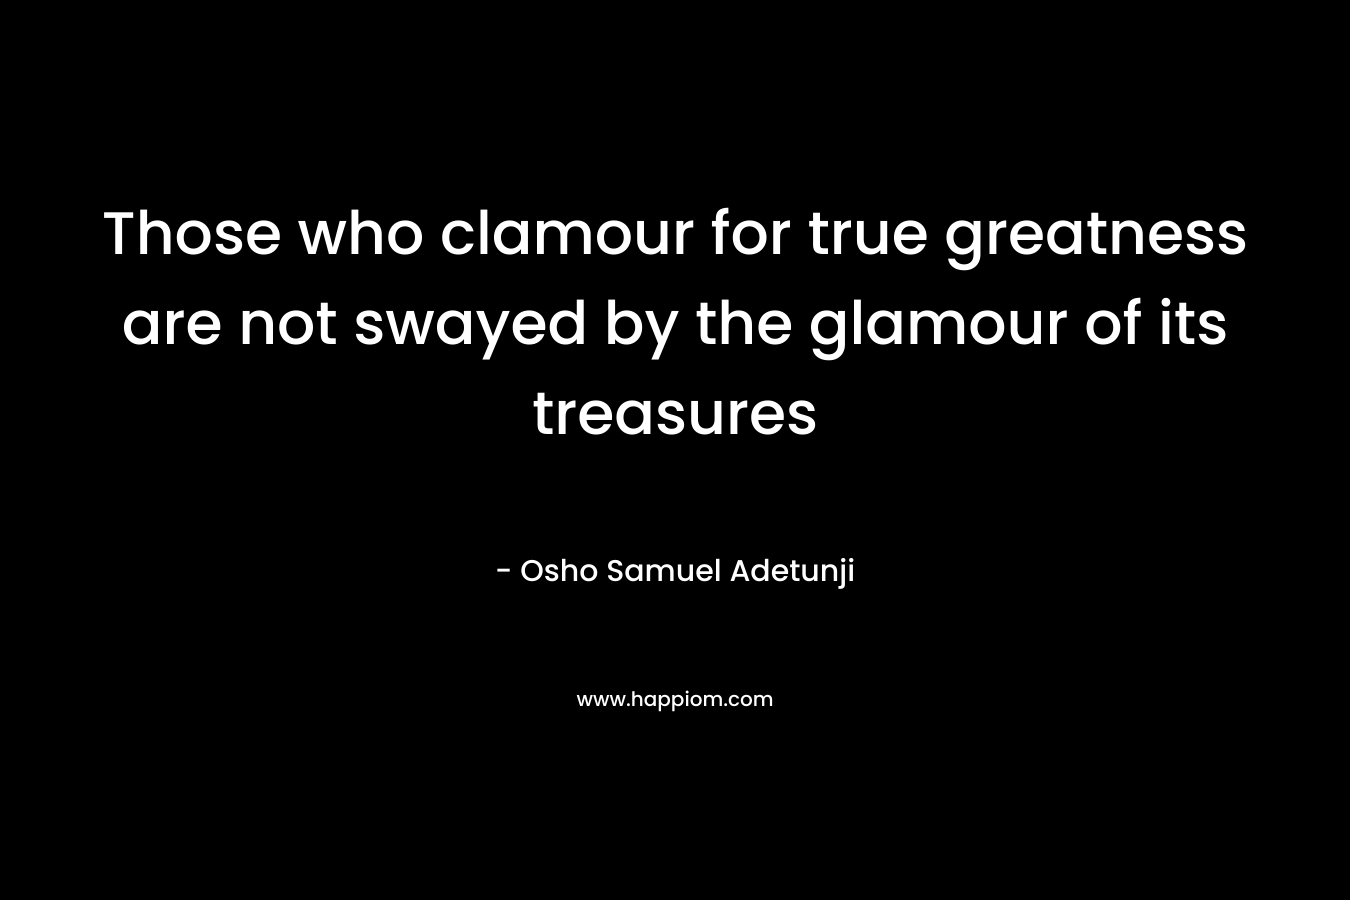 Those who clamour for true greatness are not swayed by the glamour of its treasures – Osho Samuel Adetunji